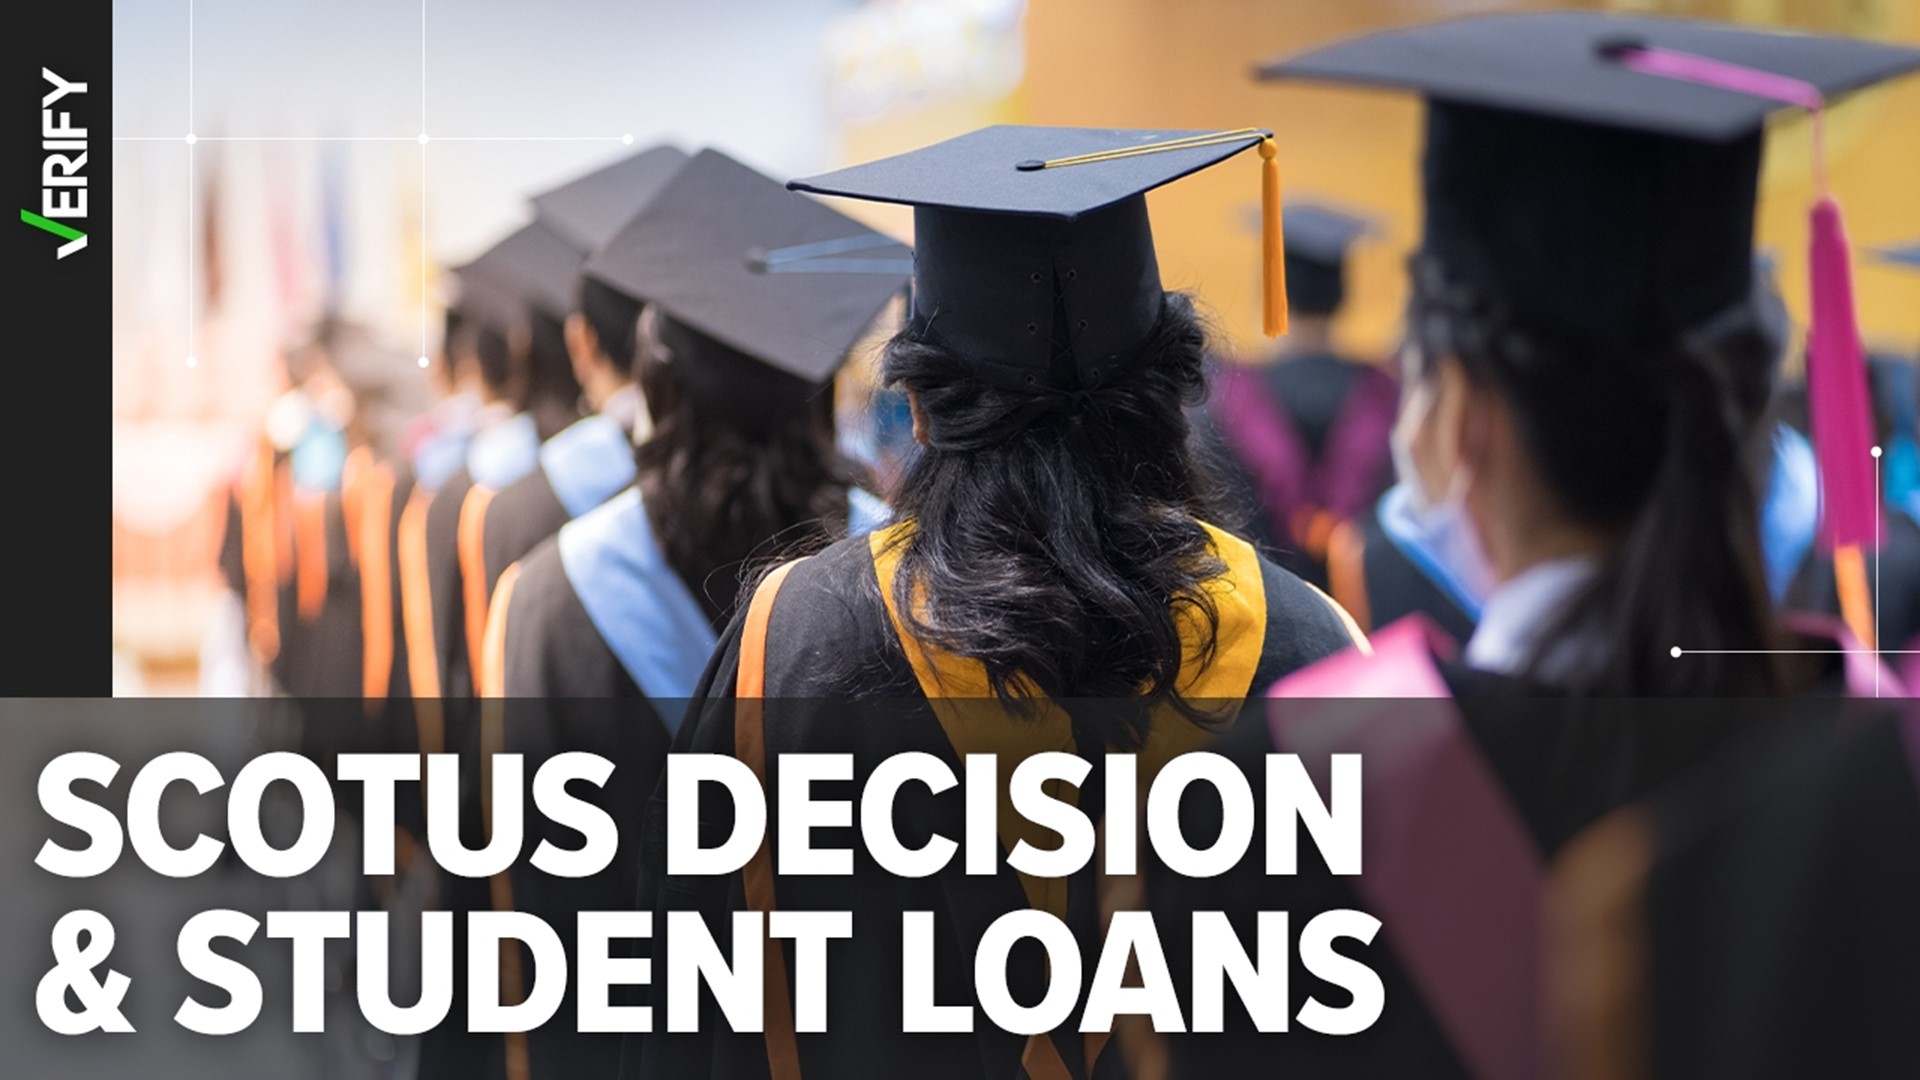 When will student loan payments restart? Here’s what borrowers need to know after the SCOTUS student debt relief ruling.